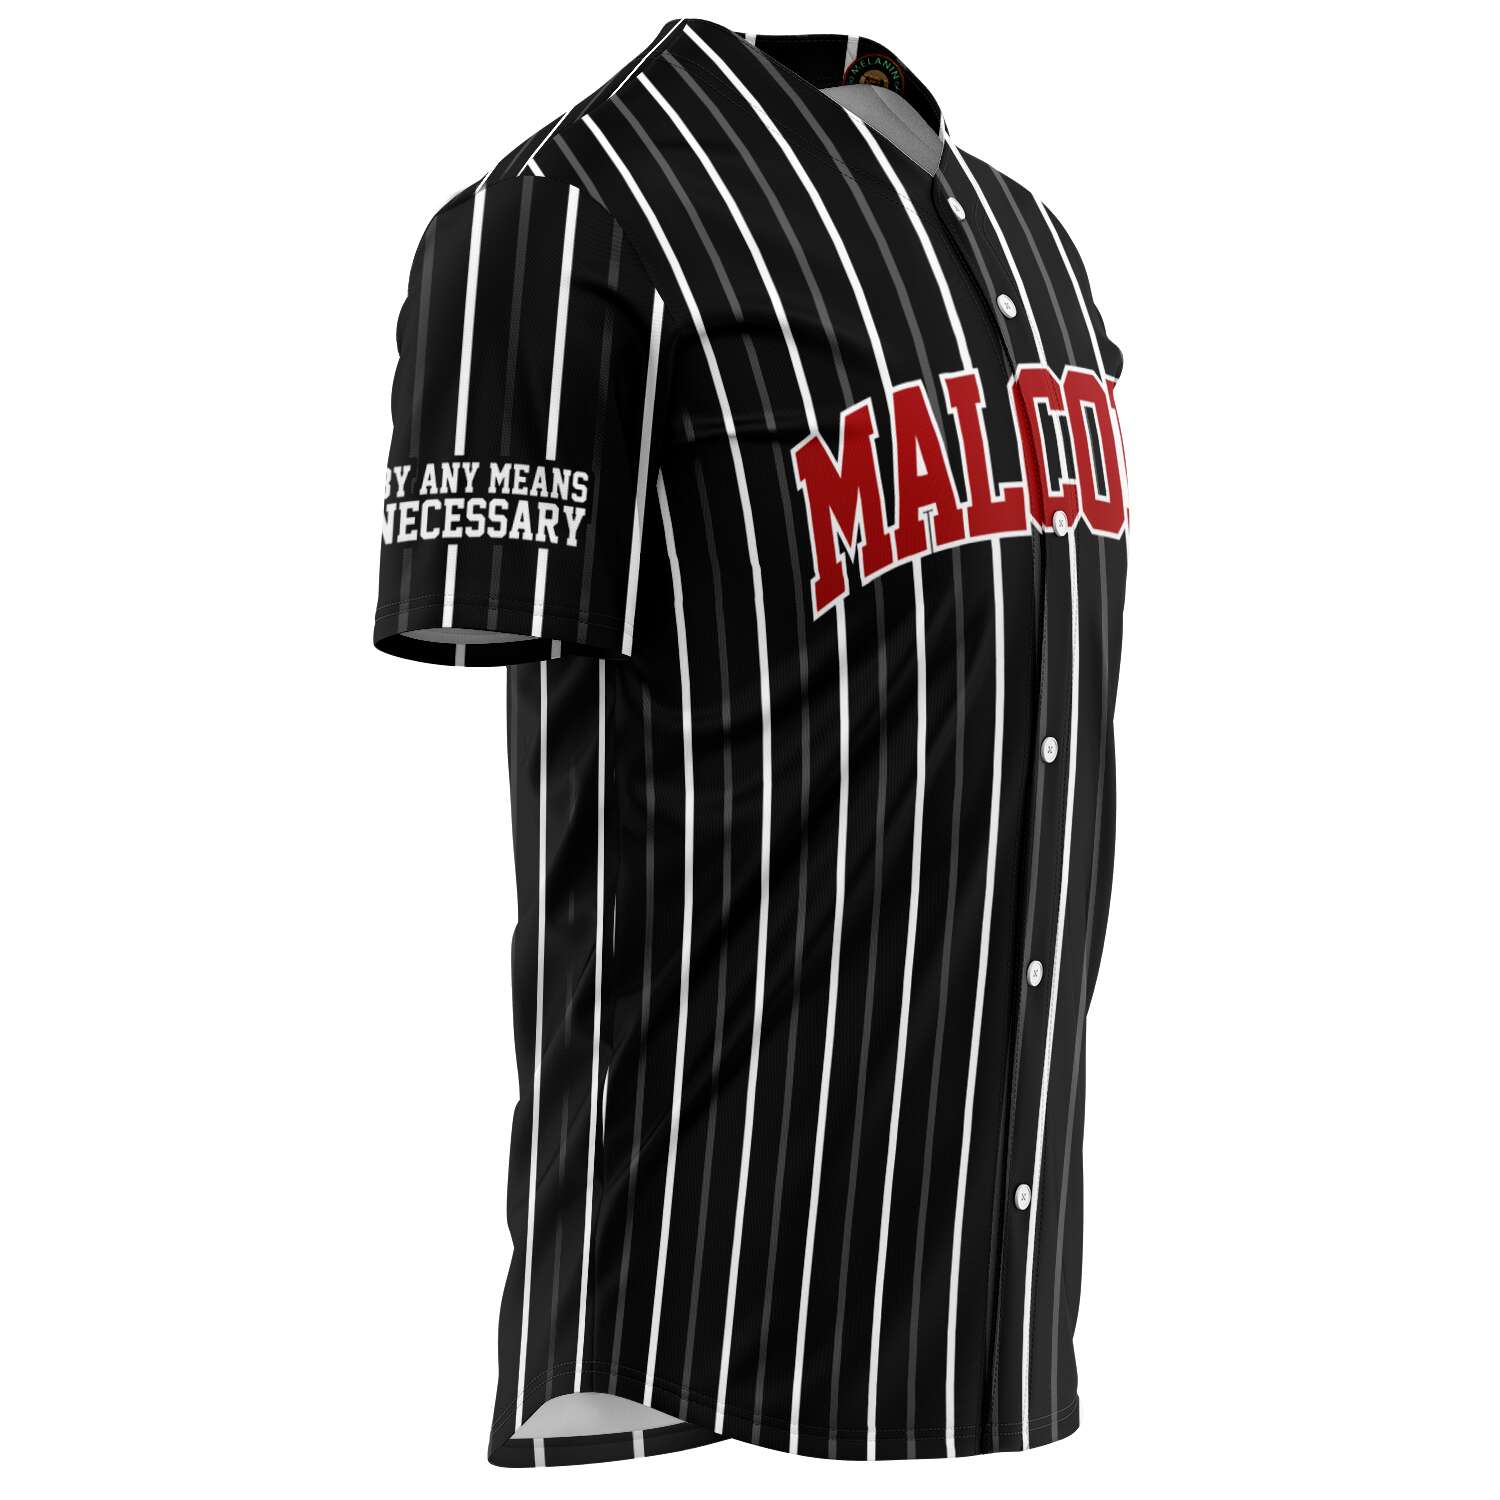 Malcolm X Black and Red Baseball Jersey